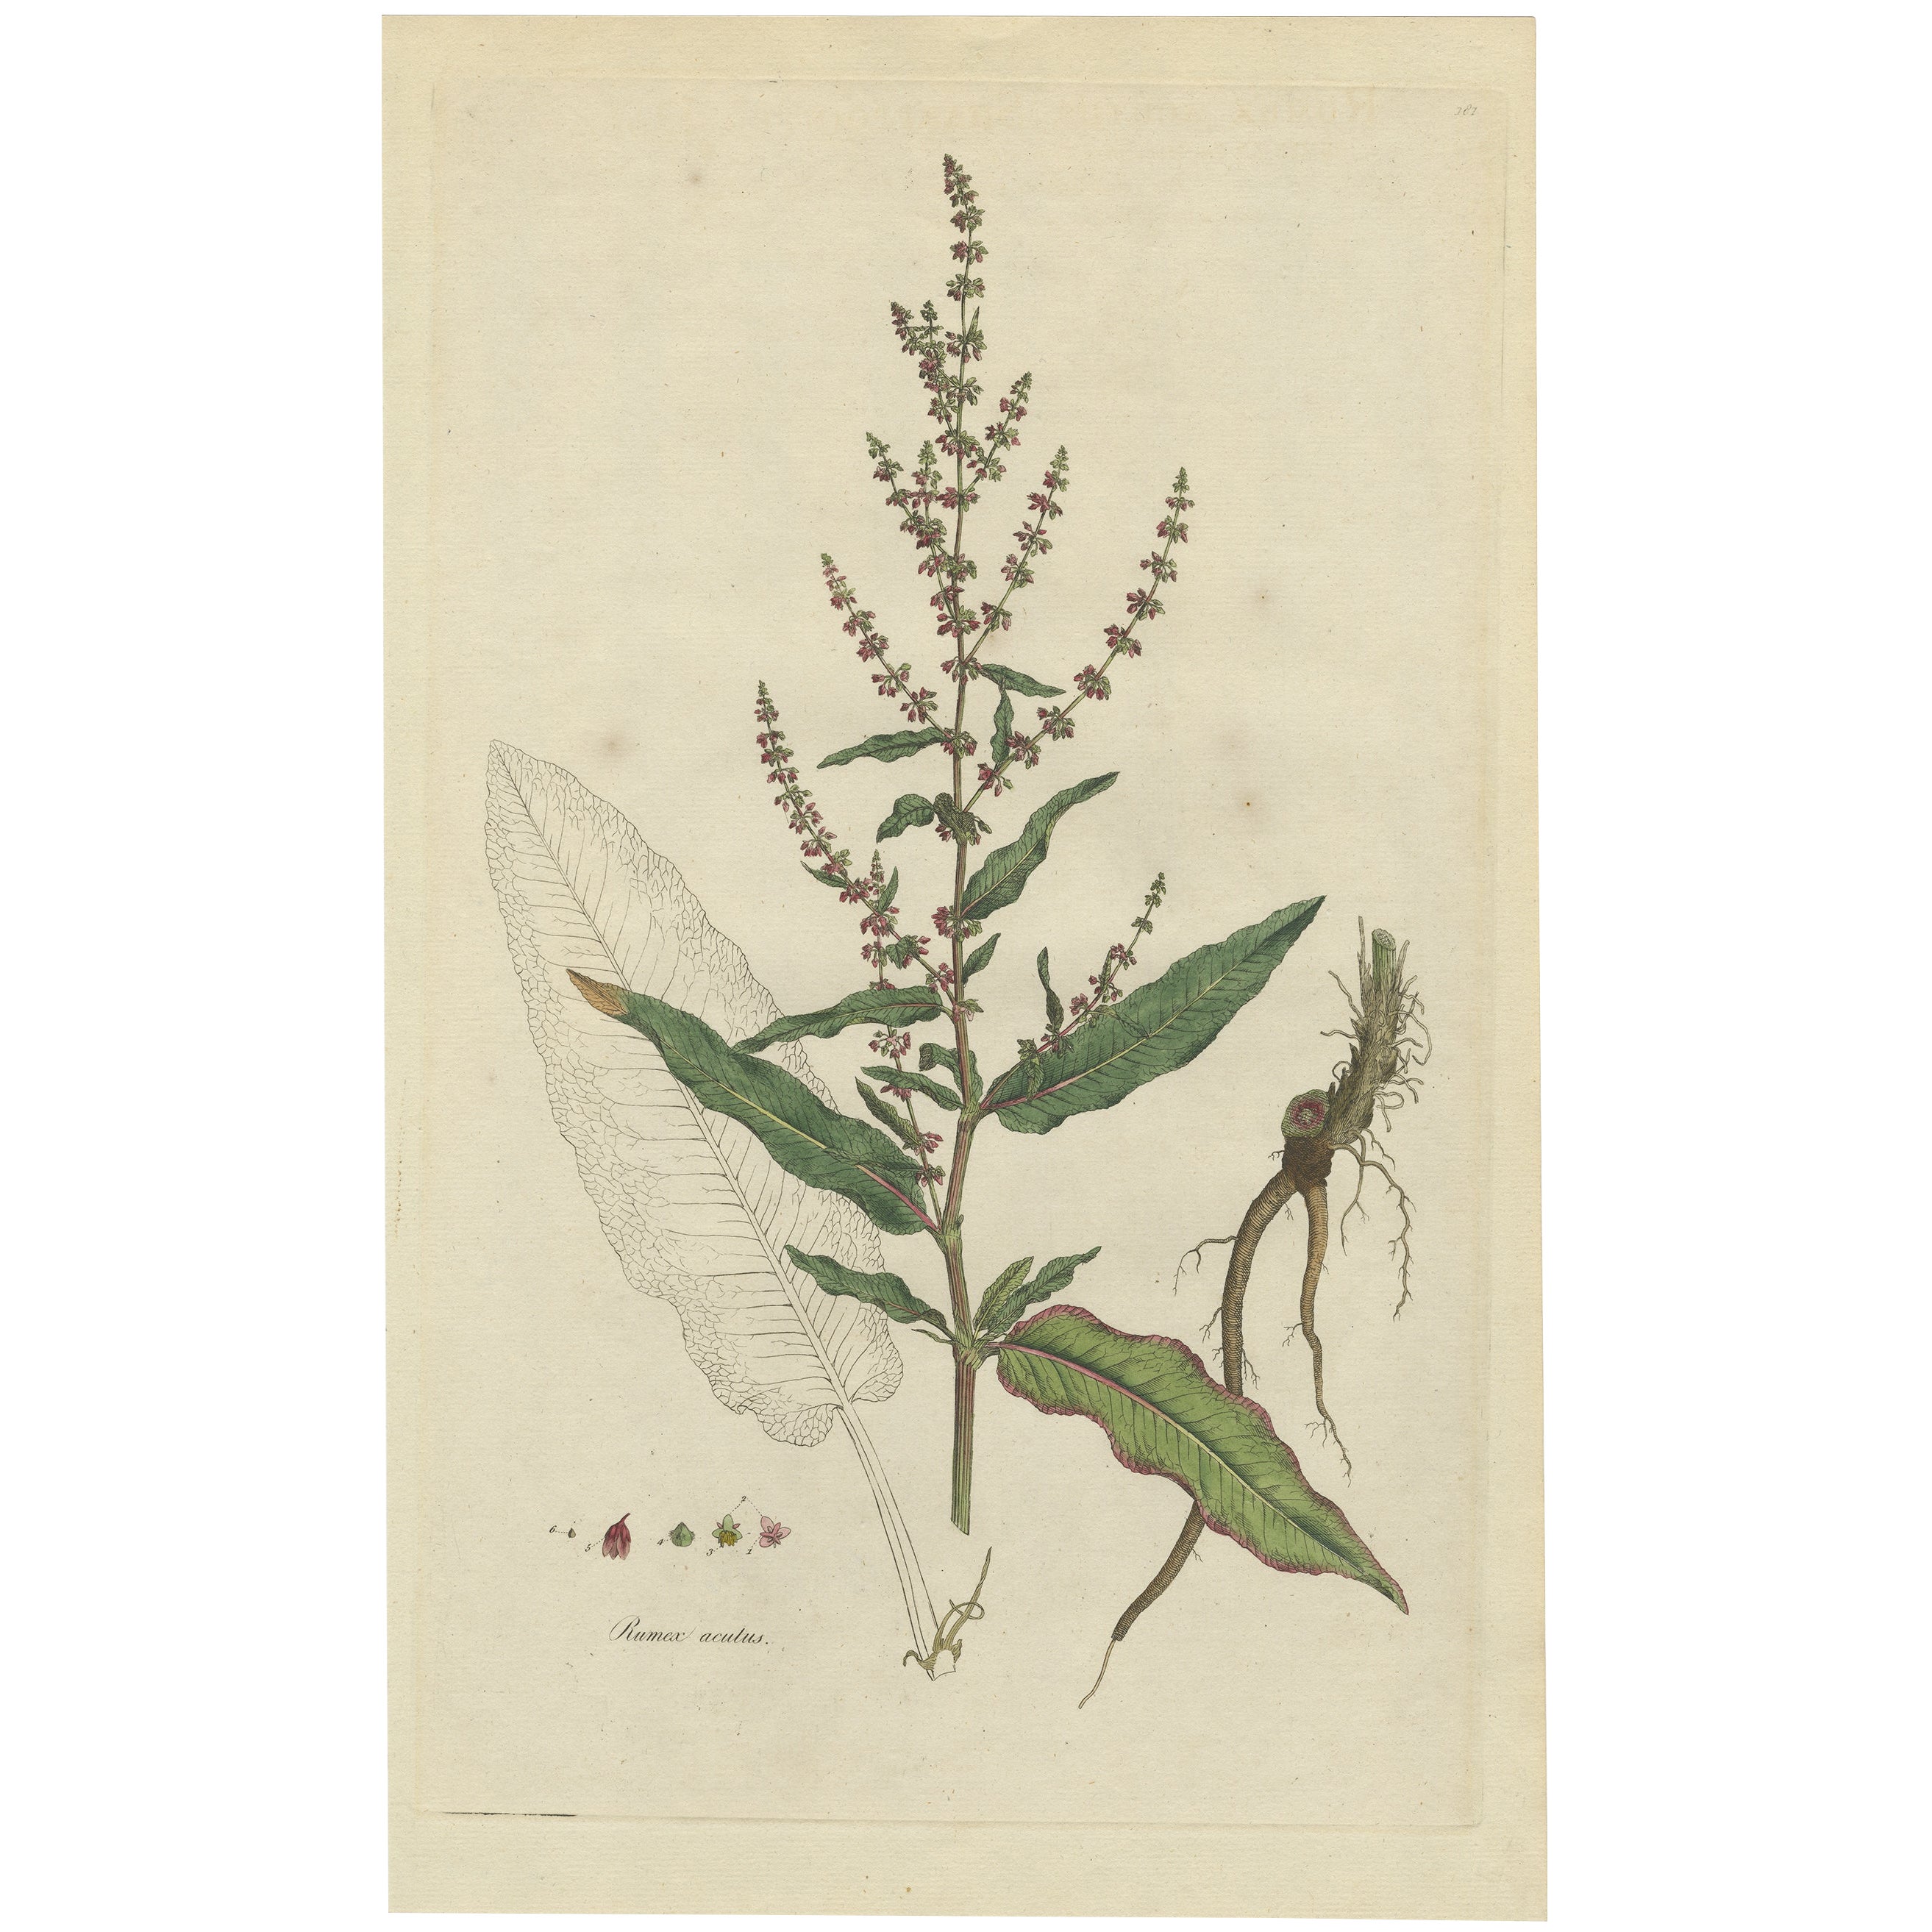 Antique Print of a the Plant Named The Rumex Acutus or Sharp-Pointed Dock, c1800